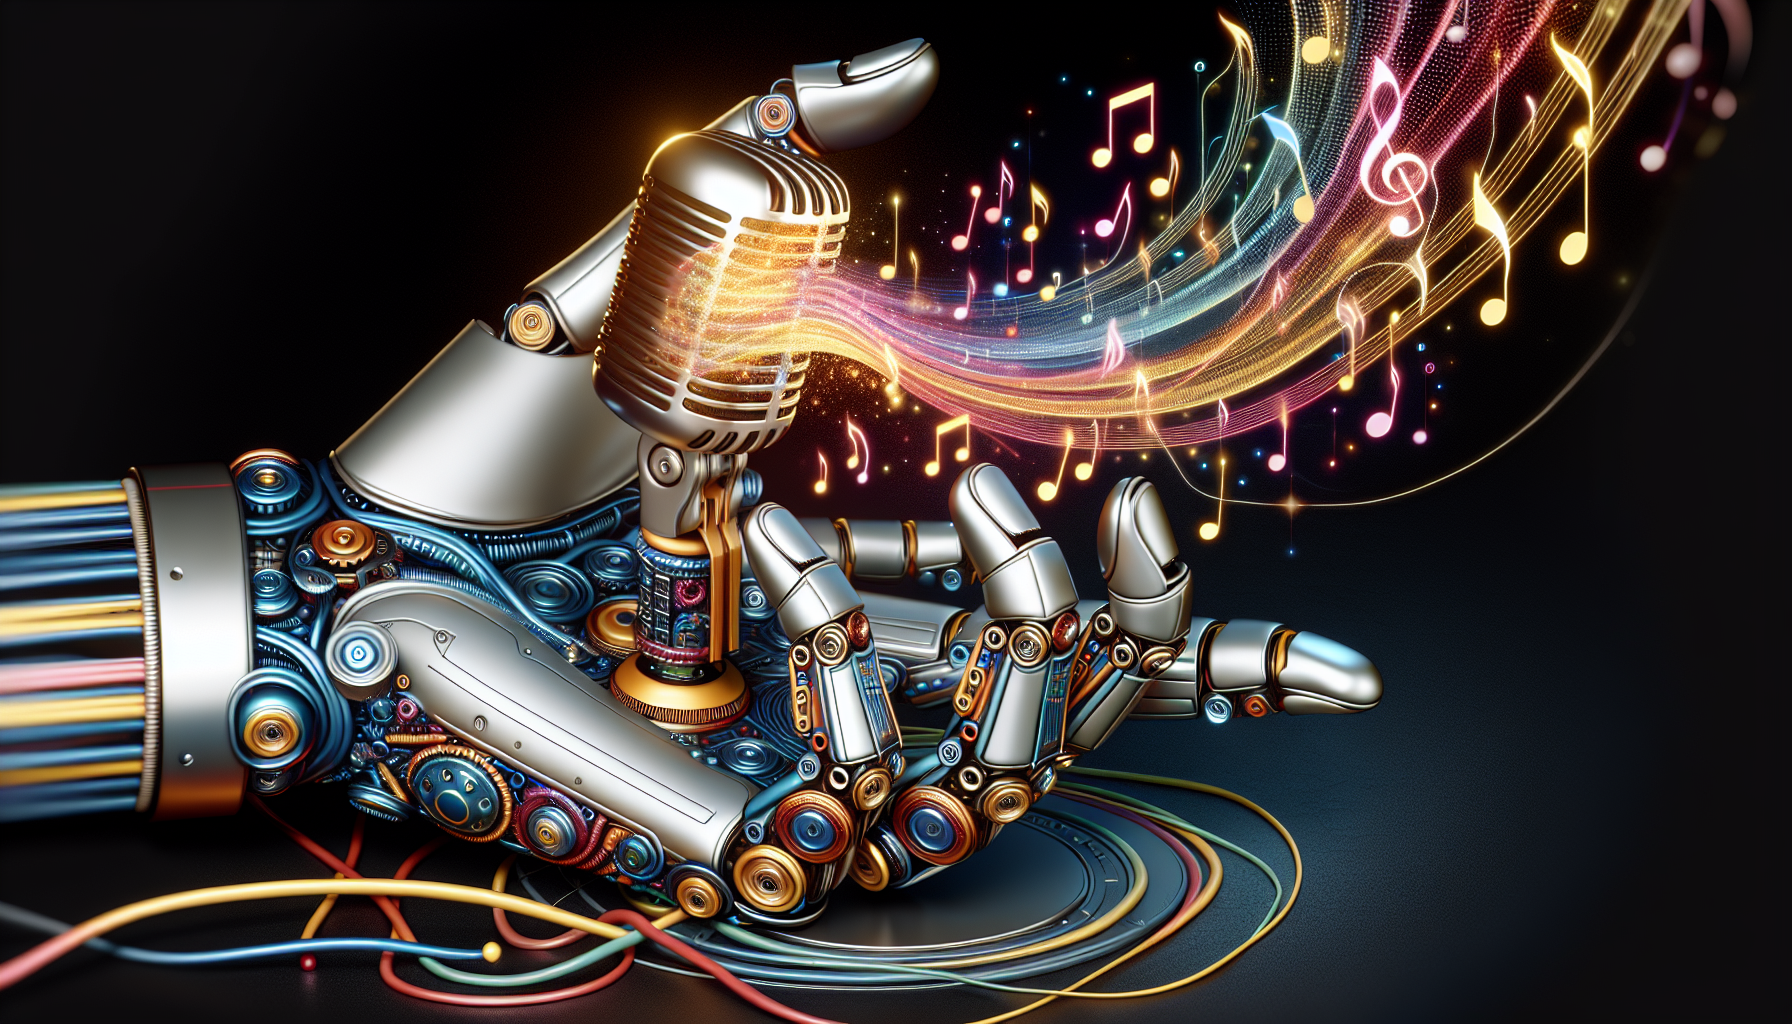 A robotic hand holding a glowing microphone with musical notes and lines symbolizing sound waves emanating from it.